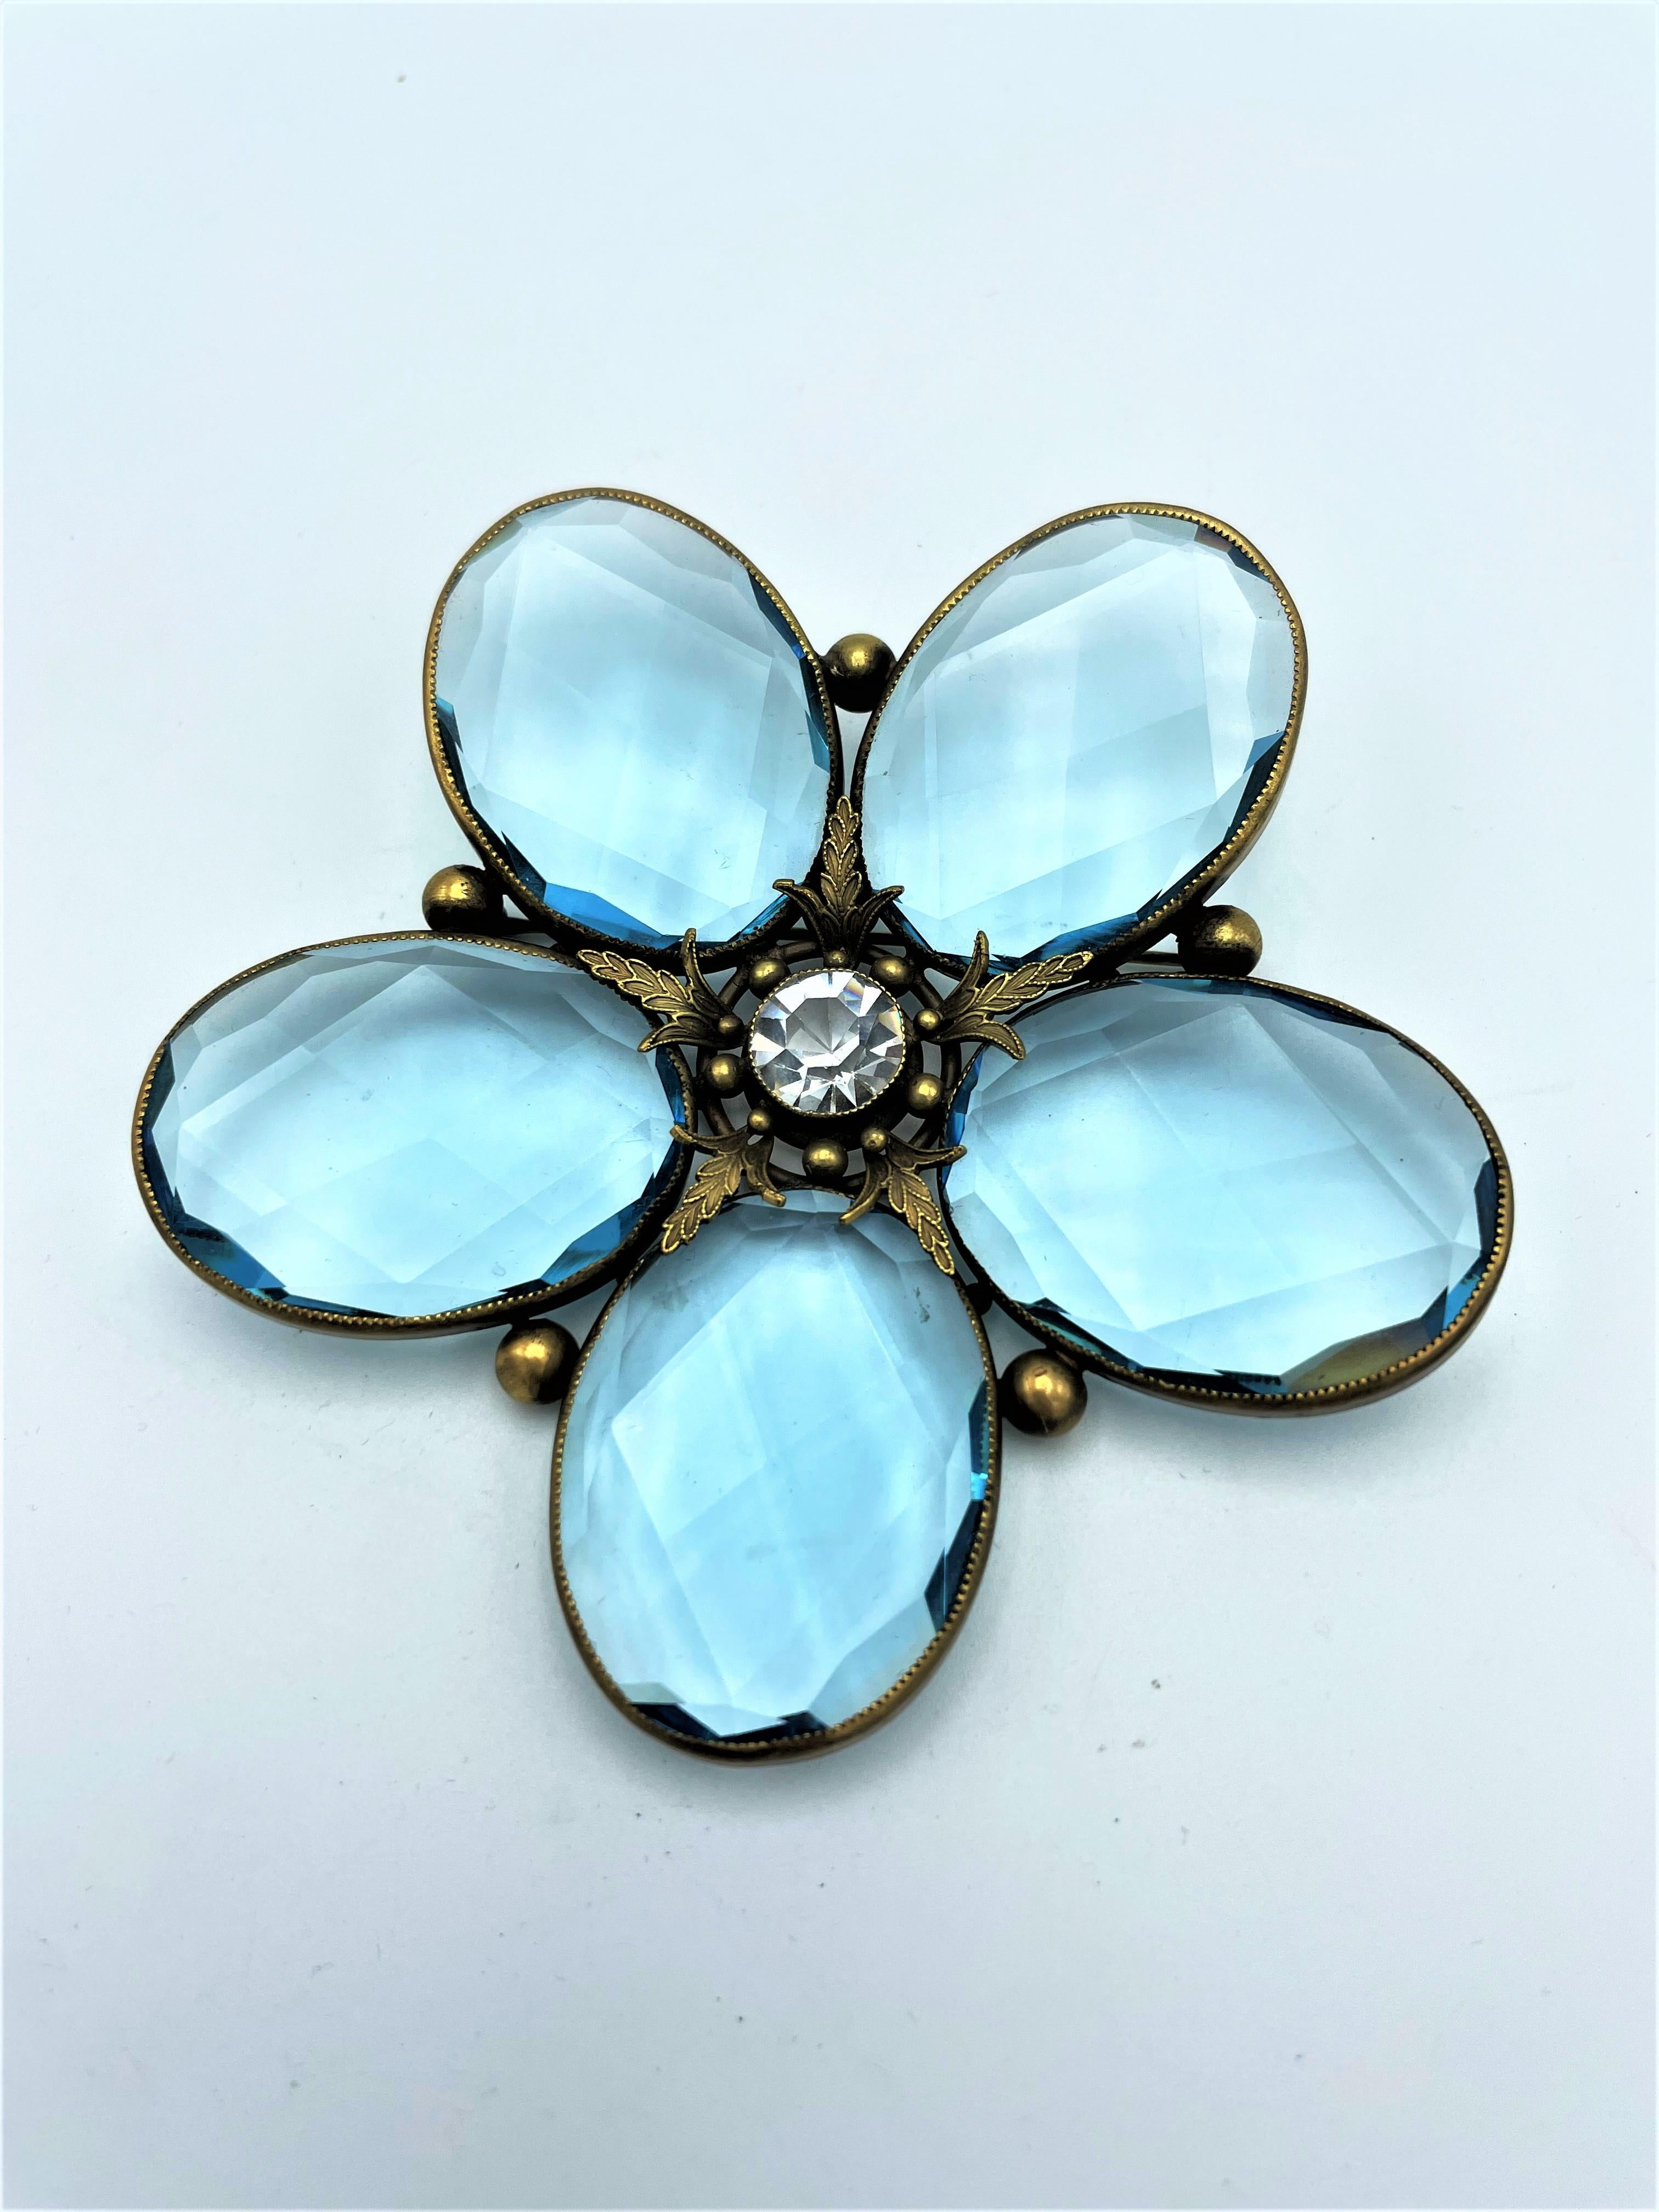 About
Joseff of Hollywood stunning flower brooch with 5 aqua crystal petals, central cluster of large cut rhinestone and small brass  leaves between the petals. A very rare piece for the Joseff collector. 

Measurement: Hight 9,5 cm x 9 cm, signed